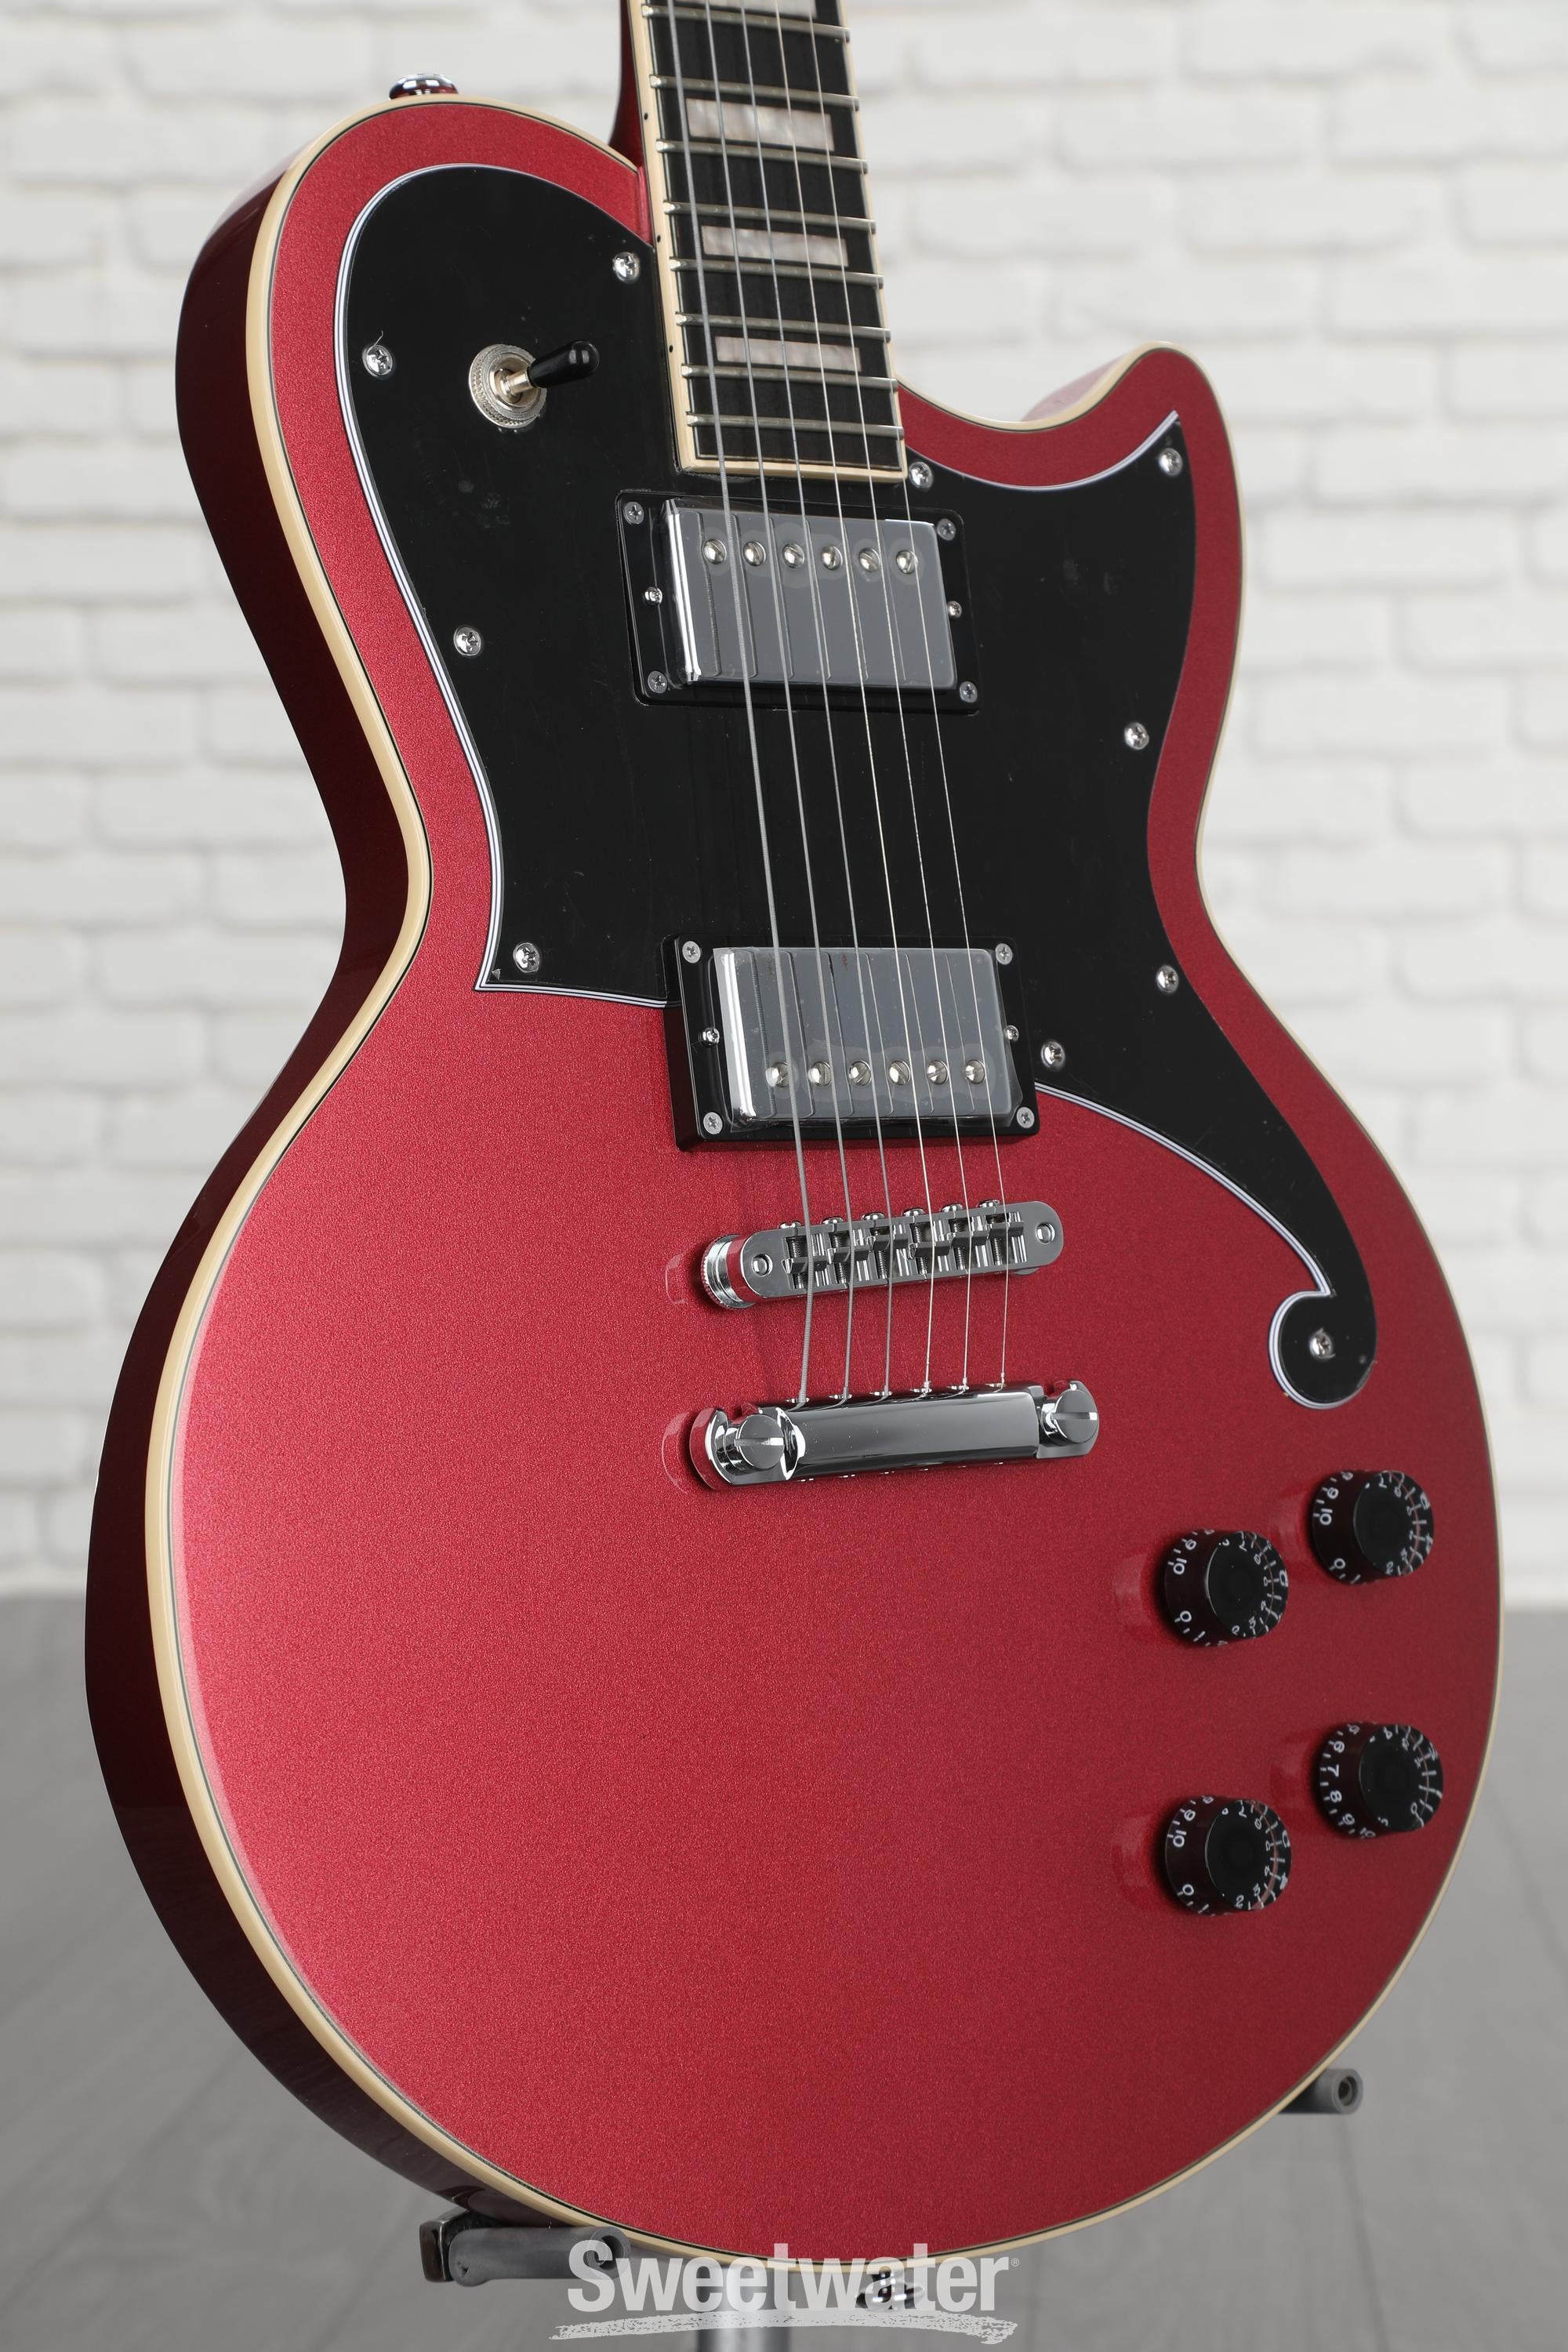 D'Angelico Premier Atlantic Electric Guitar - Oxblood with Stopbar Tailpiece